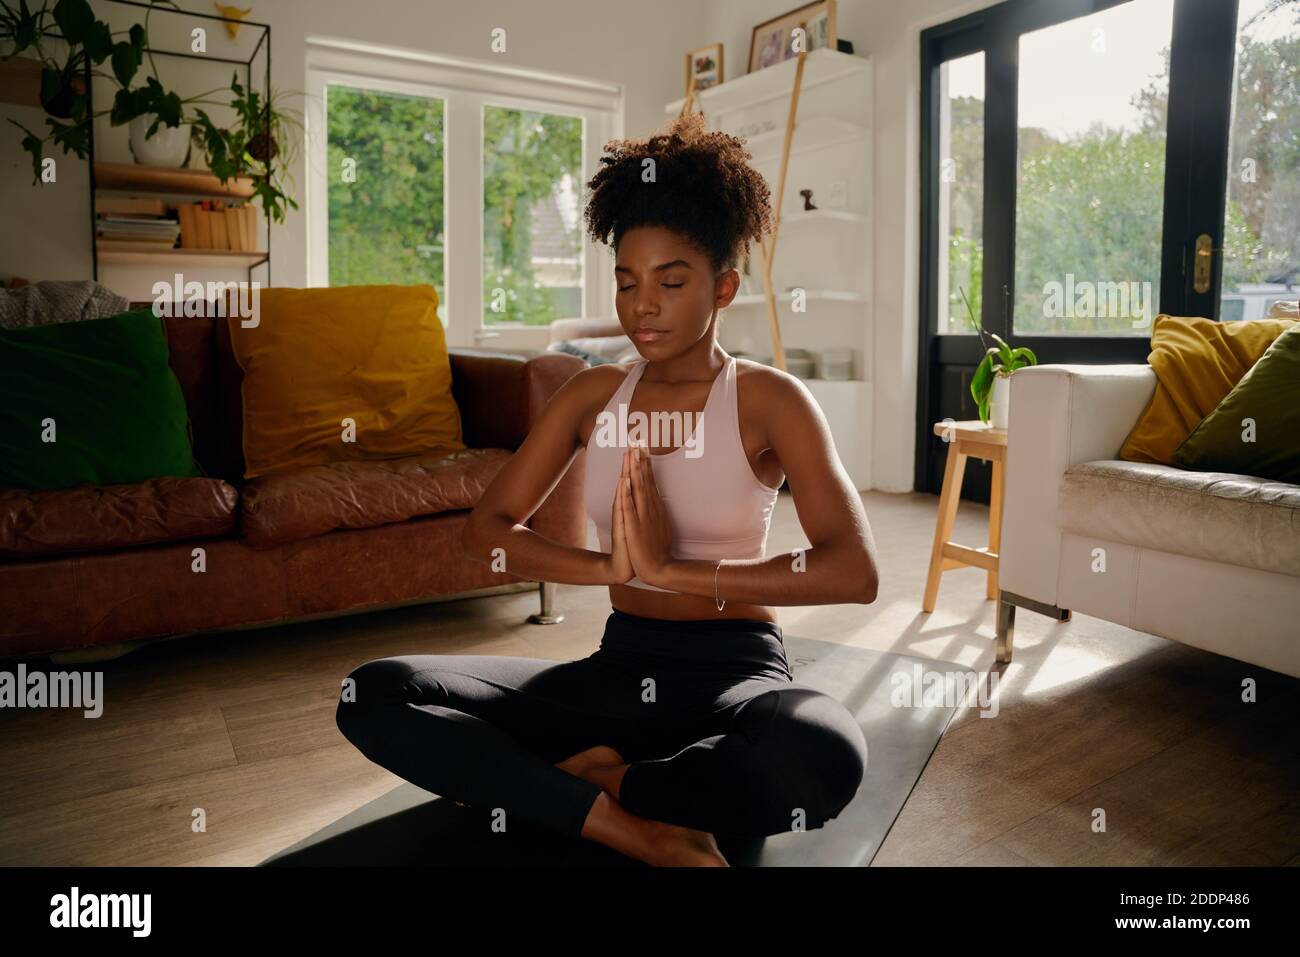 Young african woman sitting in lotus position with joined hands on yoga mat practicing breathing exercise Stock Photo